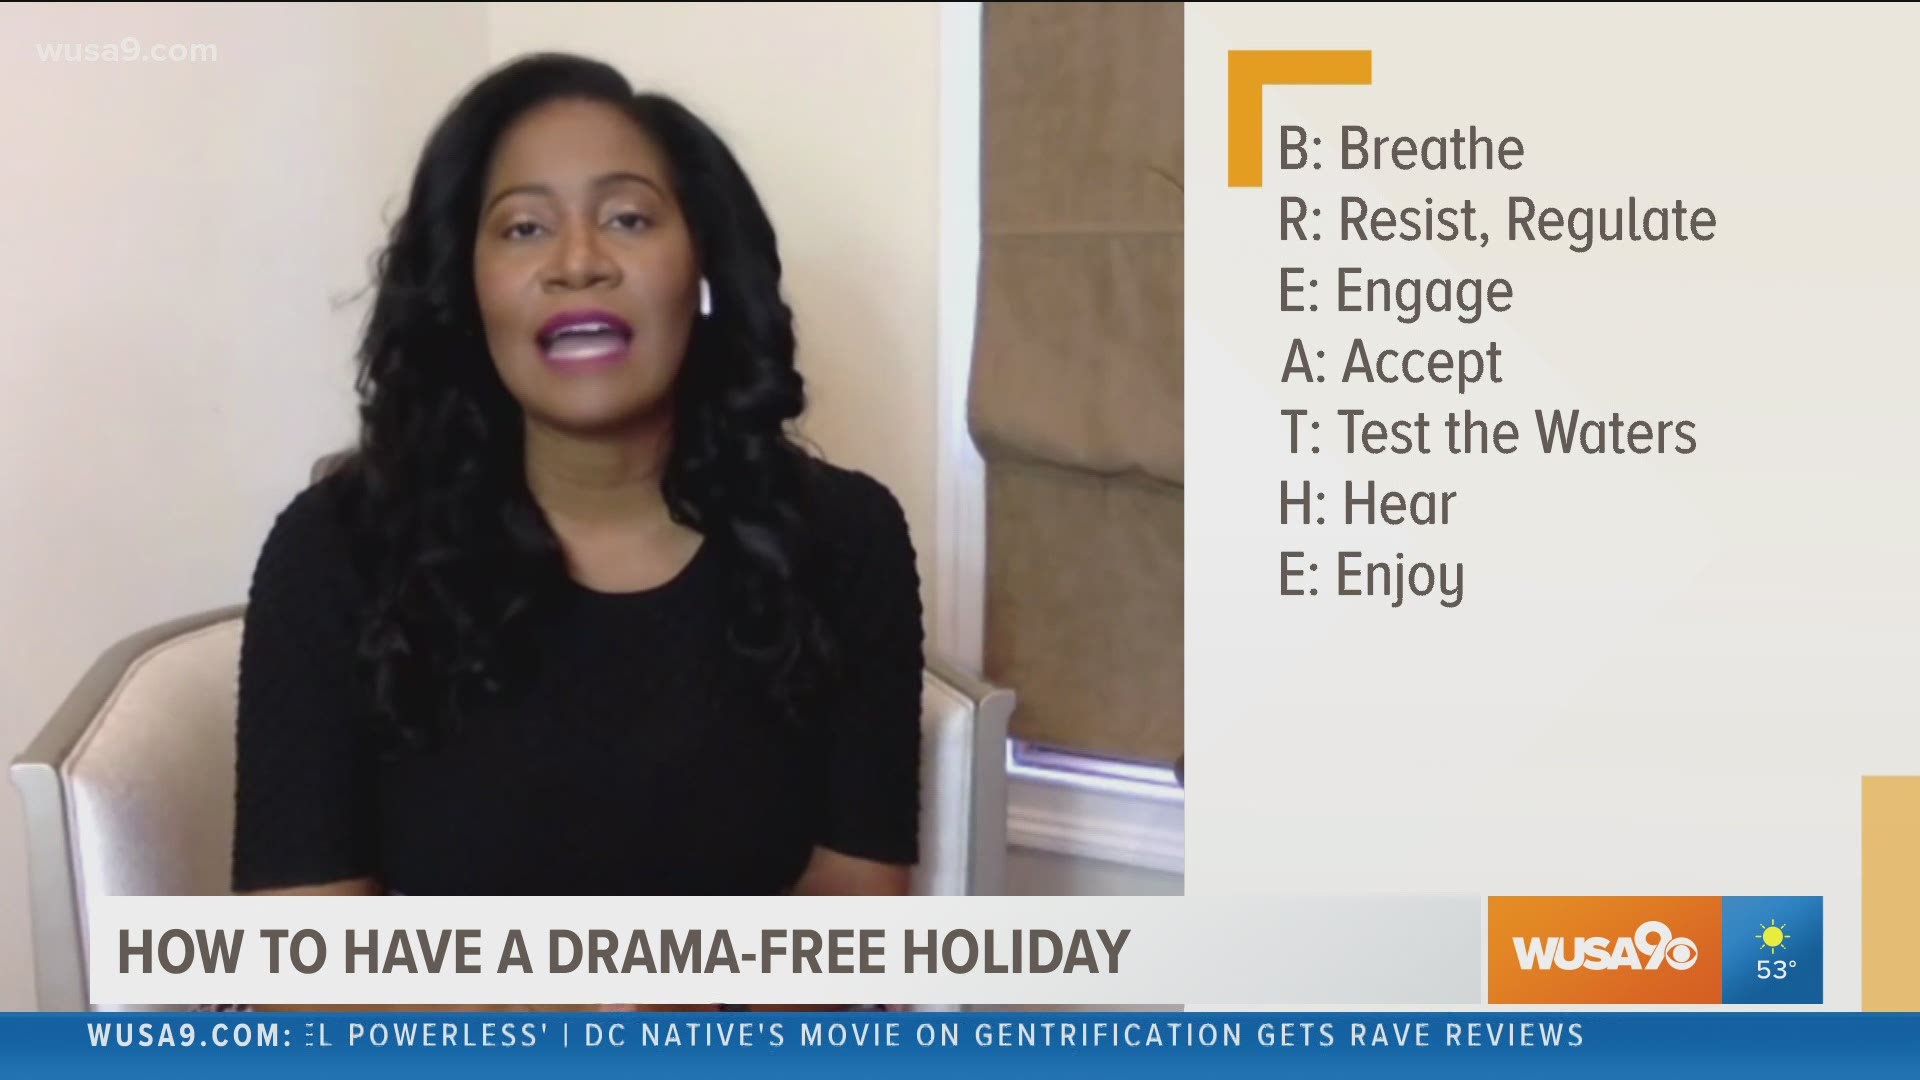 Conflict resolution expert Damali Peterson shares some tips on how to "breathe" and have a drama free holiday.